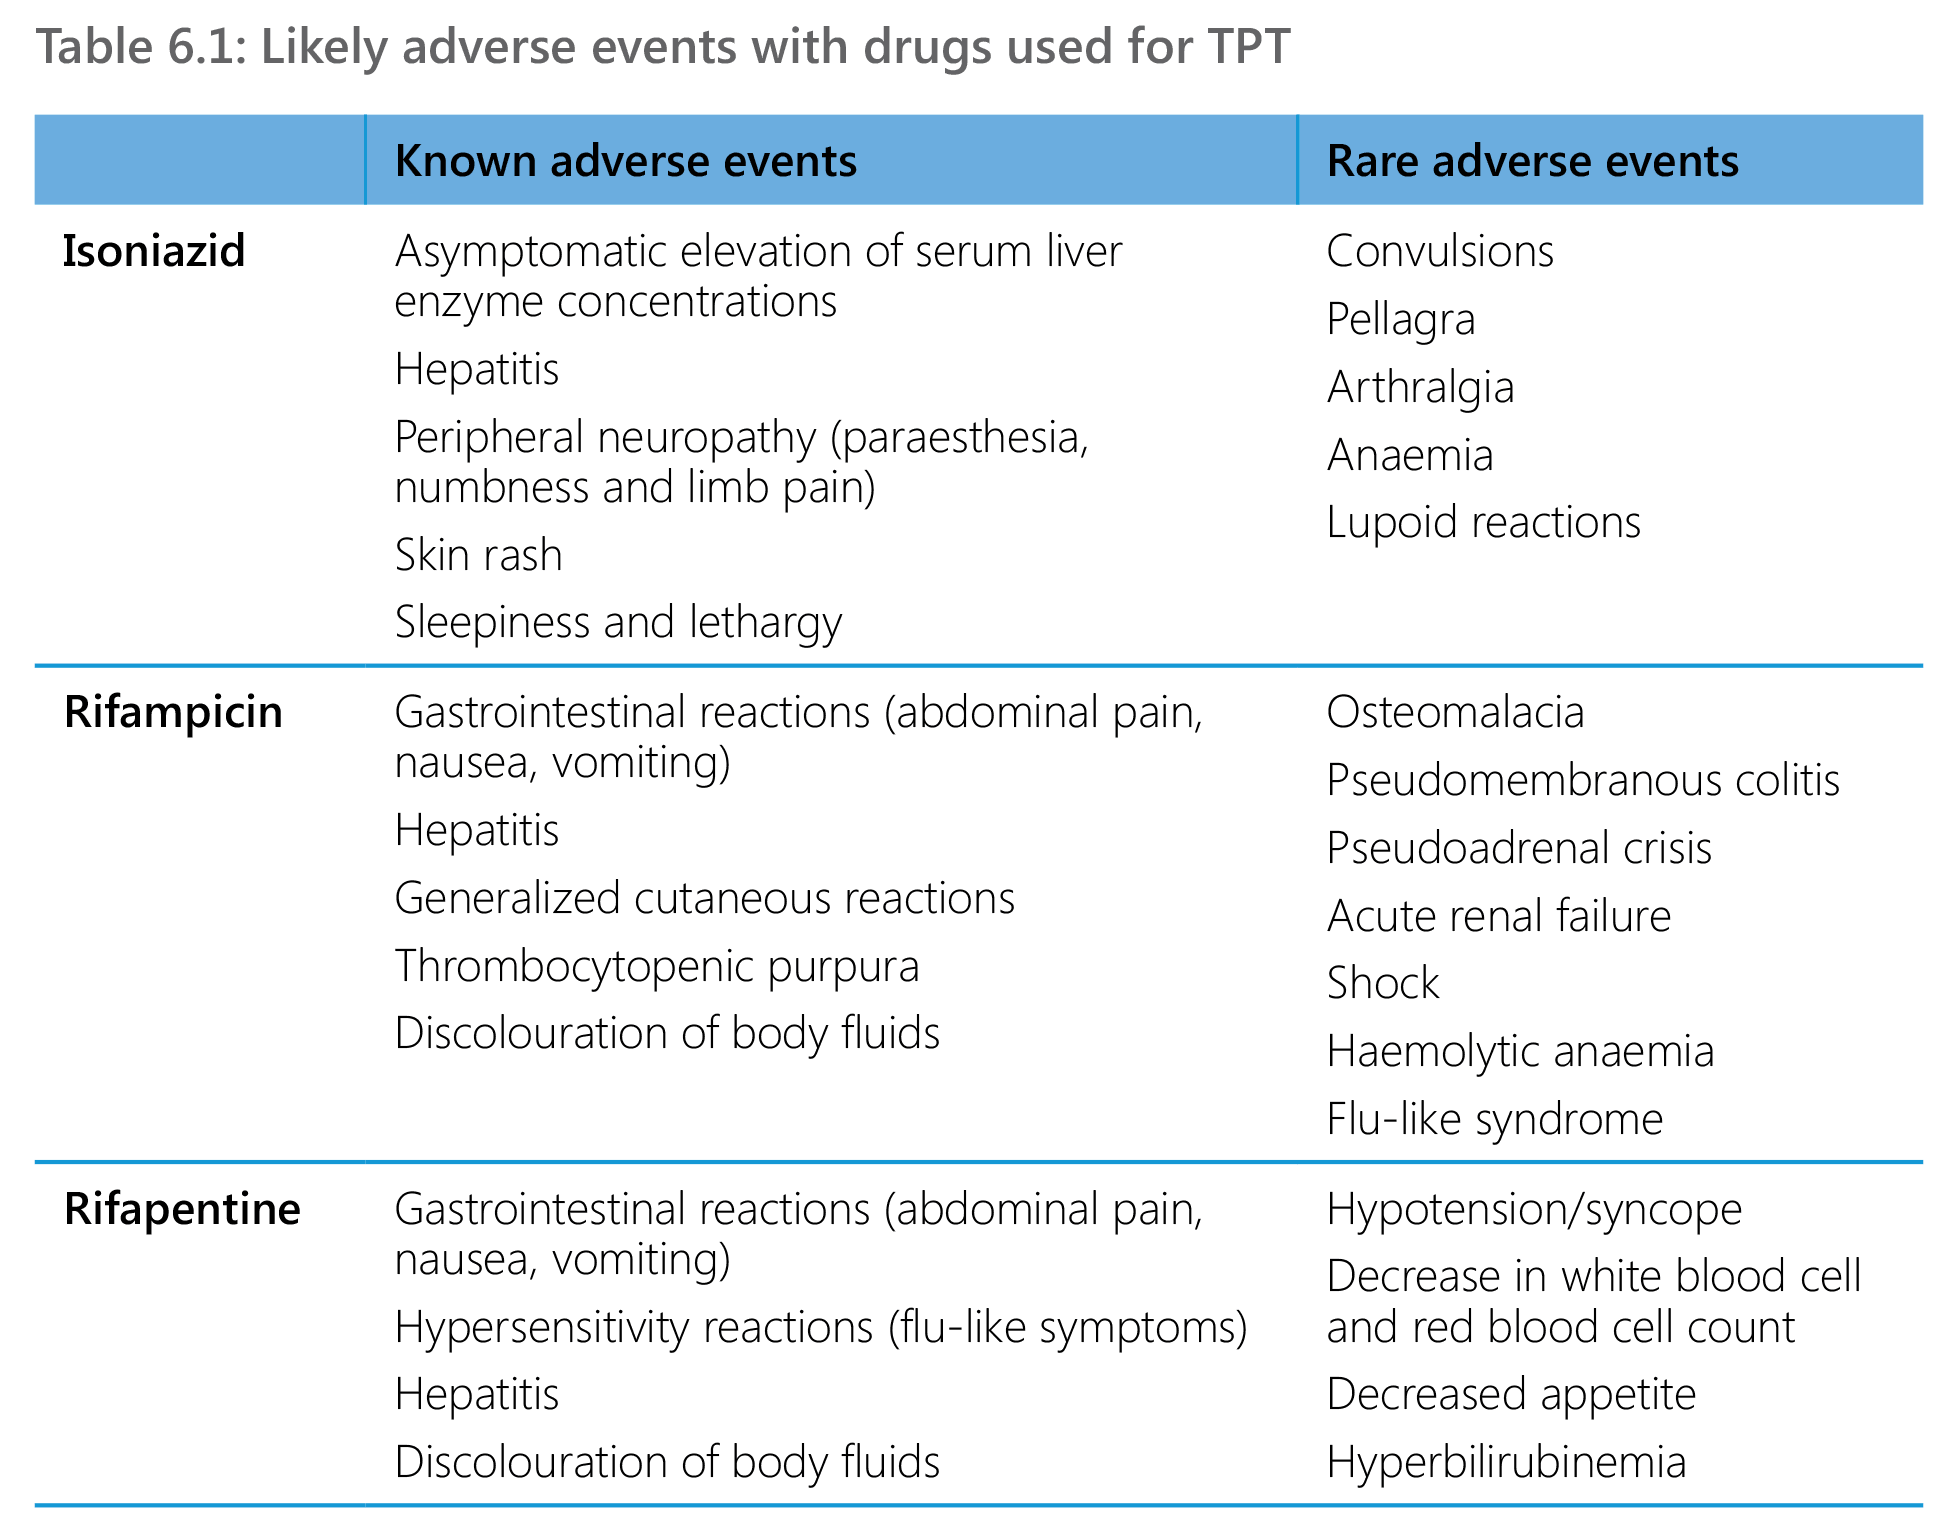 Likely adverse events with drugs used for TPT